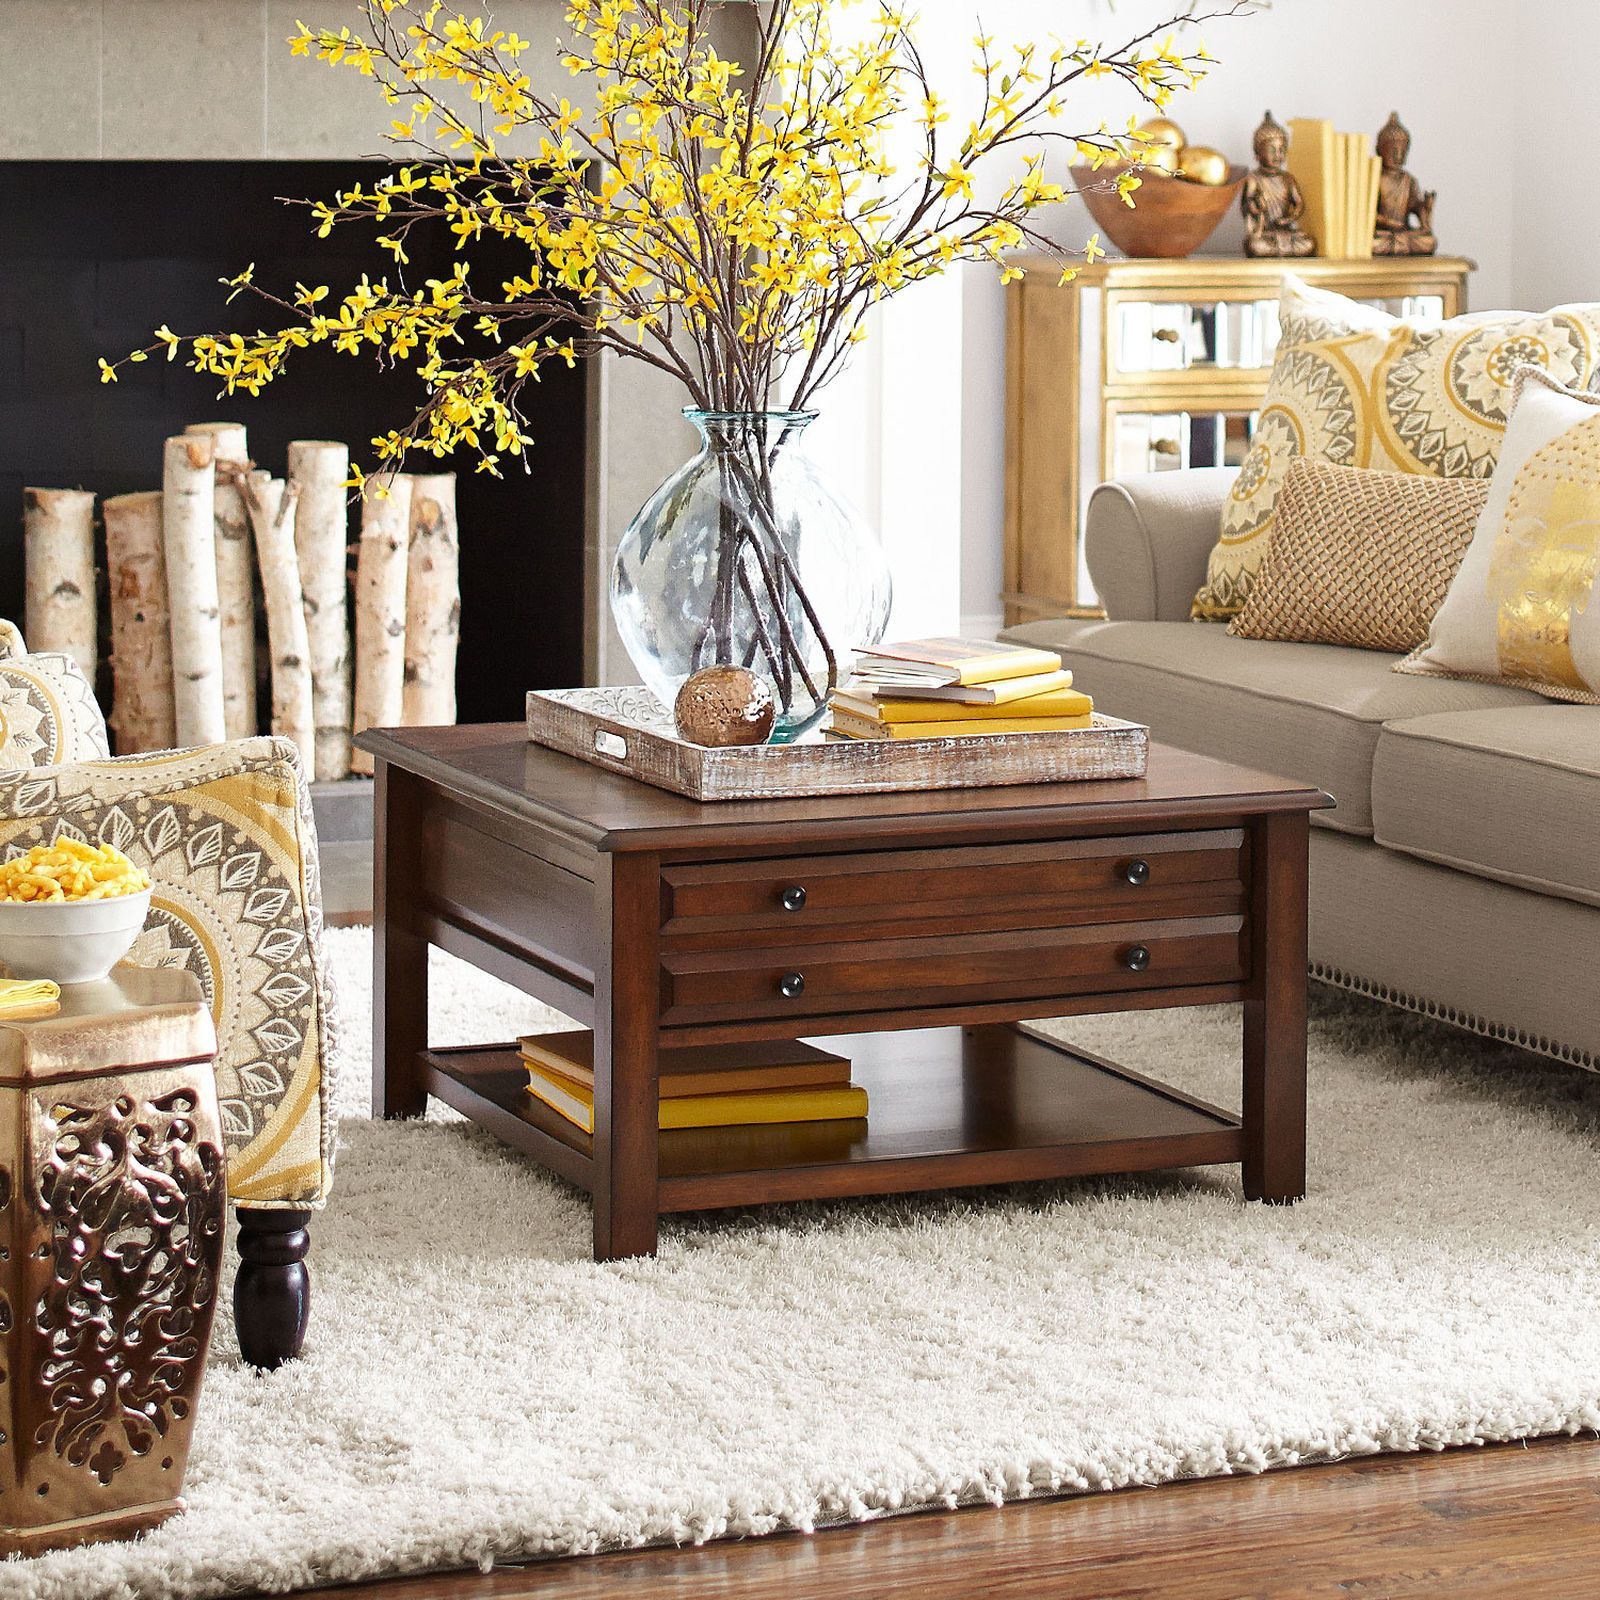 How To Decorate Your Square Coffee Table With Style – Coffee Table Decor For Transitional Square Coffee Tables (Gallery 5 of 20)